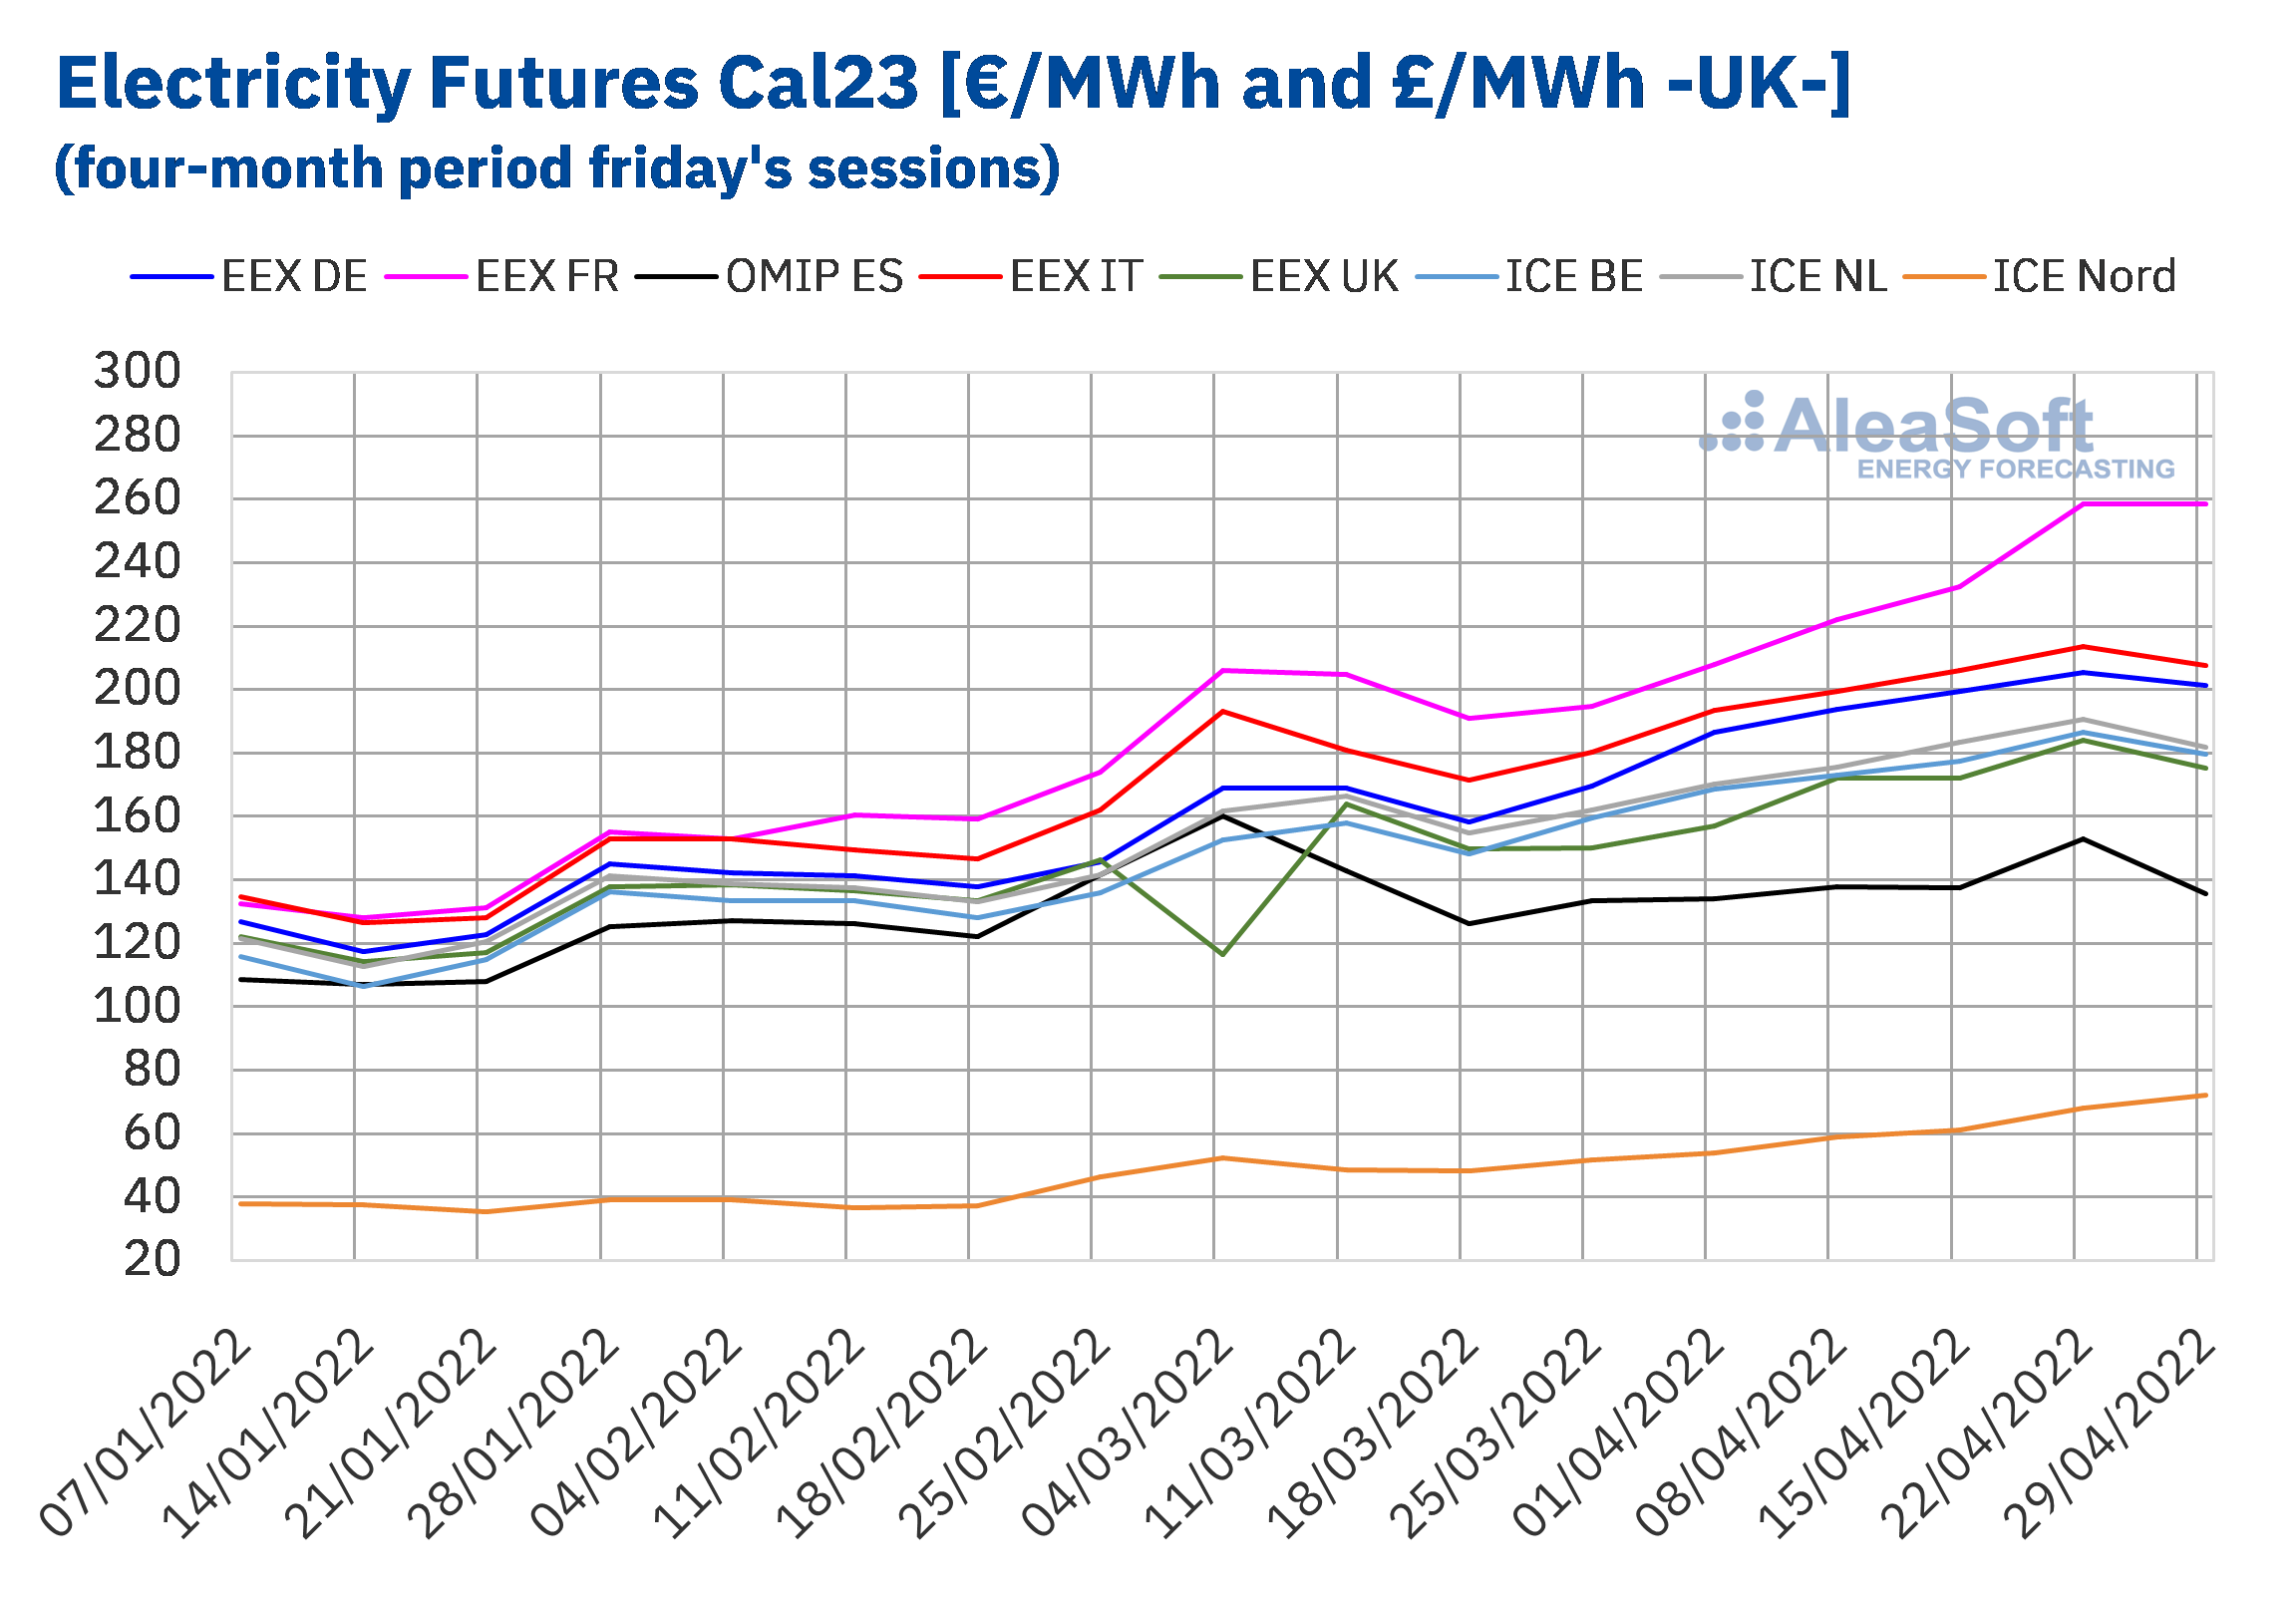 AleaSoft - Electricity futures prices 2022 jan to apr 2022